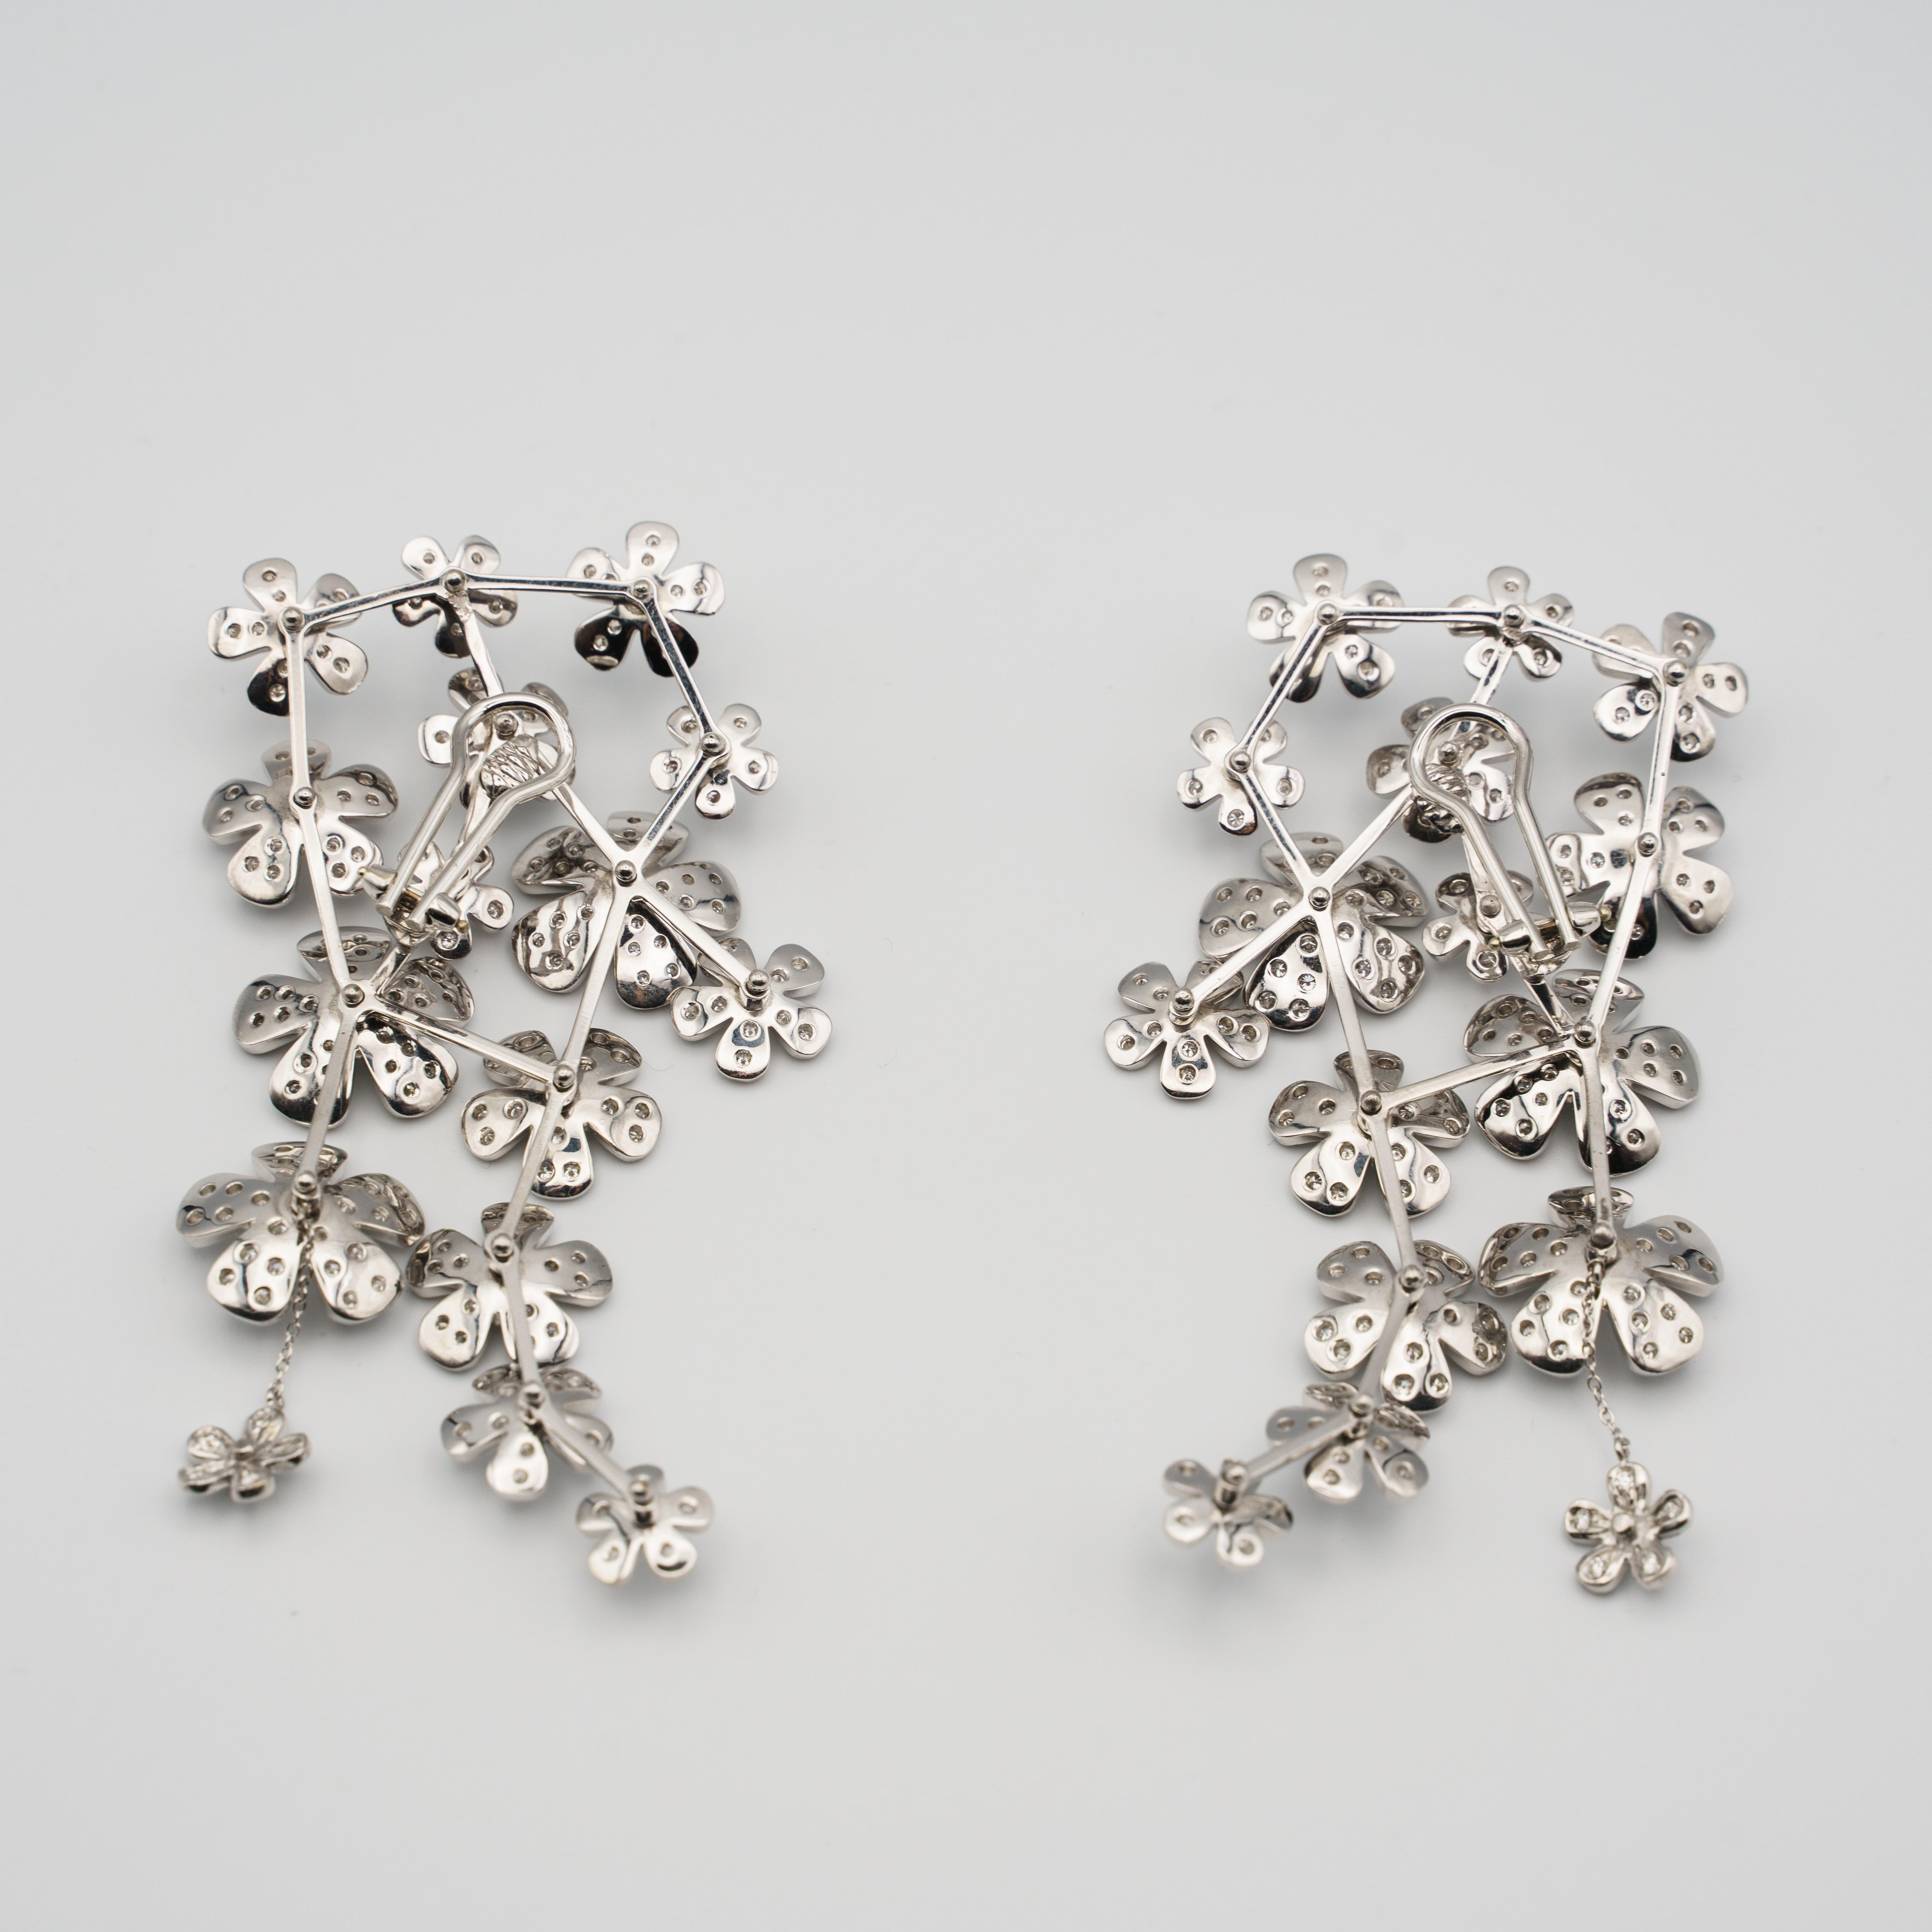 Brilliant Cut Flowers earrings in white gold and diamonds paved (approx. 10 carats).  For Sale